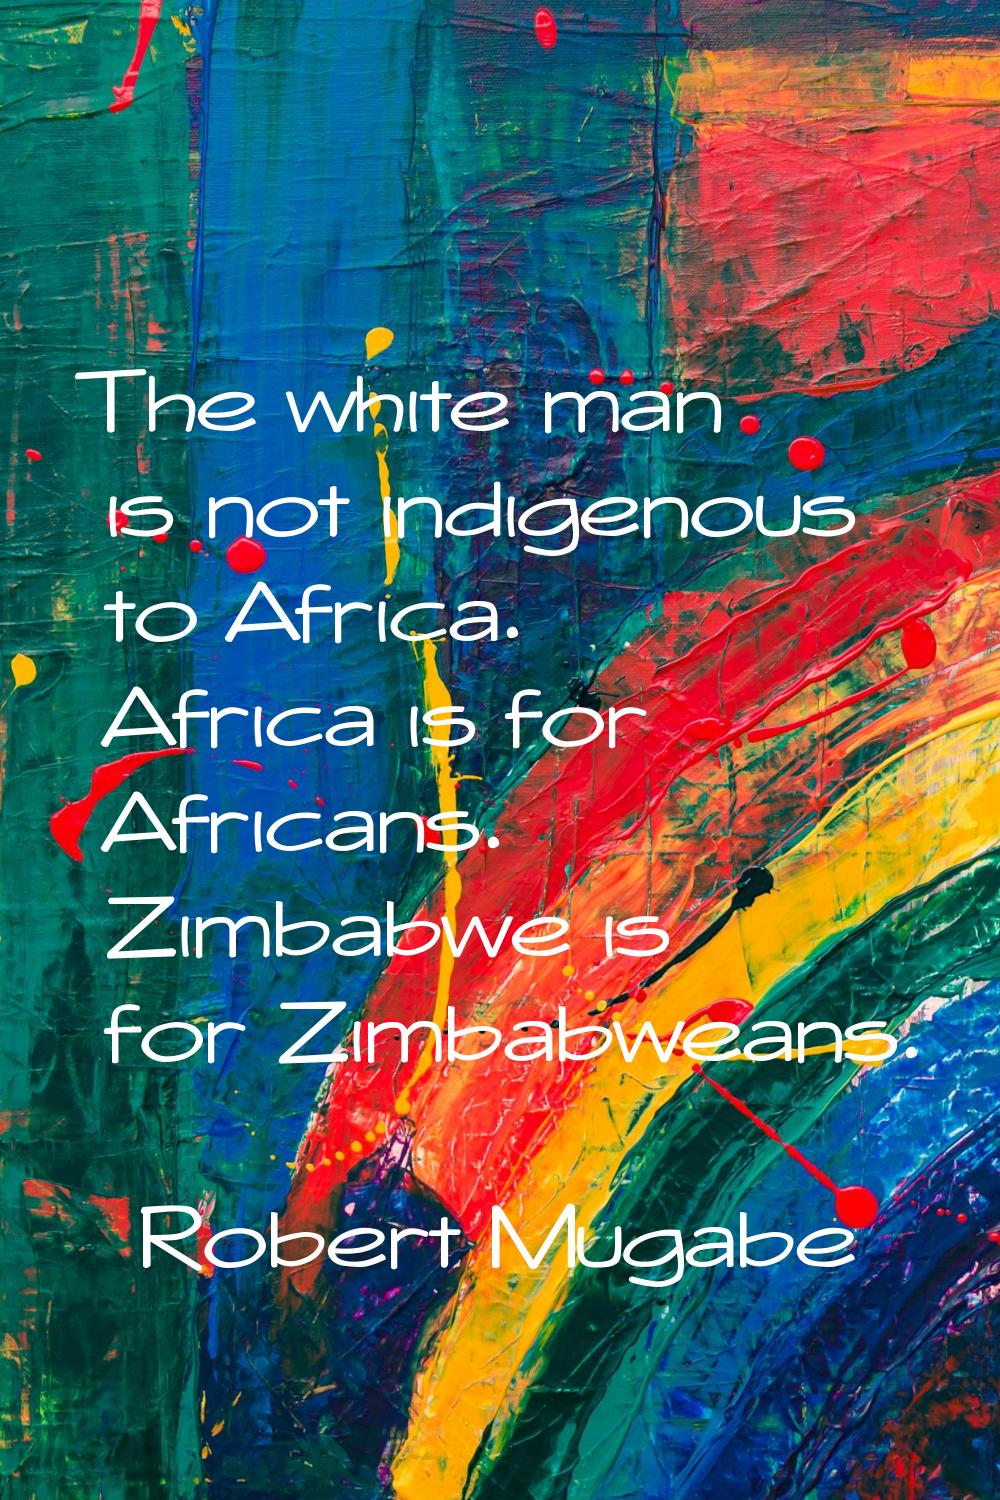 The white man is not indigenous to Africa. Africa is for Africans. Zimbabwe is for Zimbabweans.